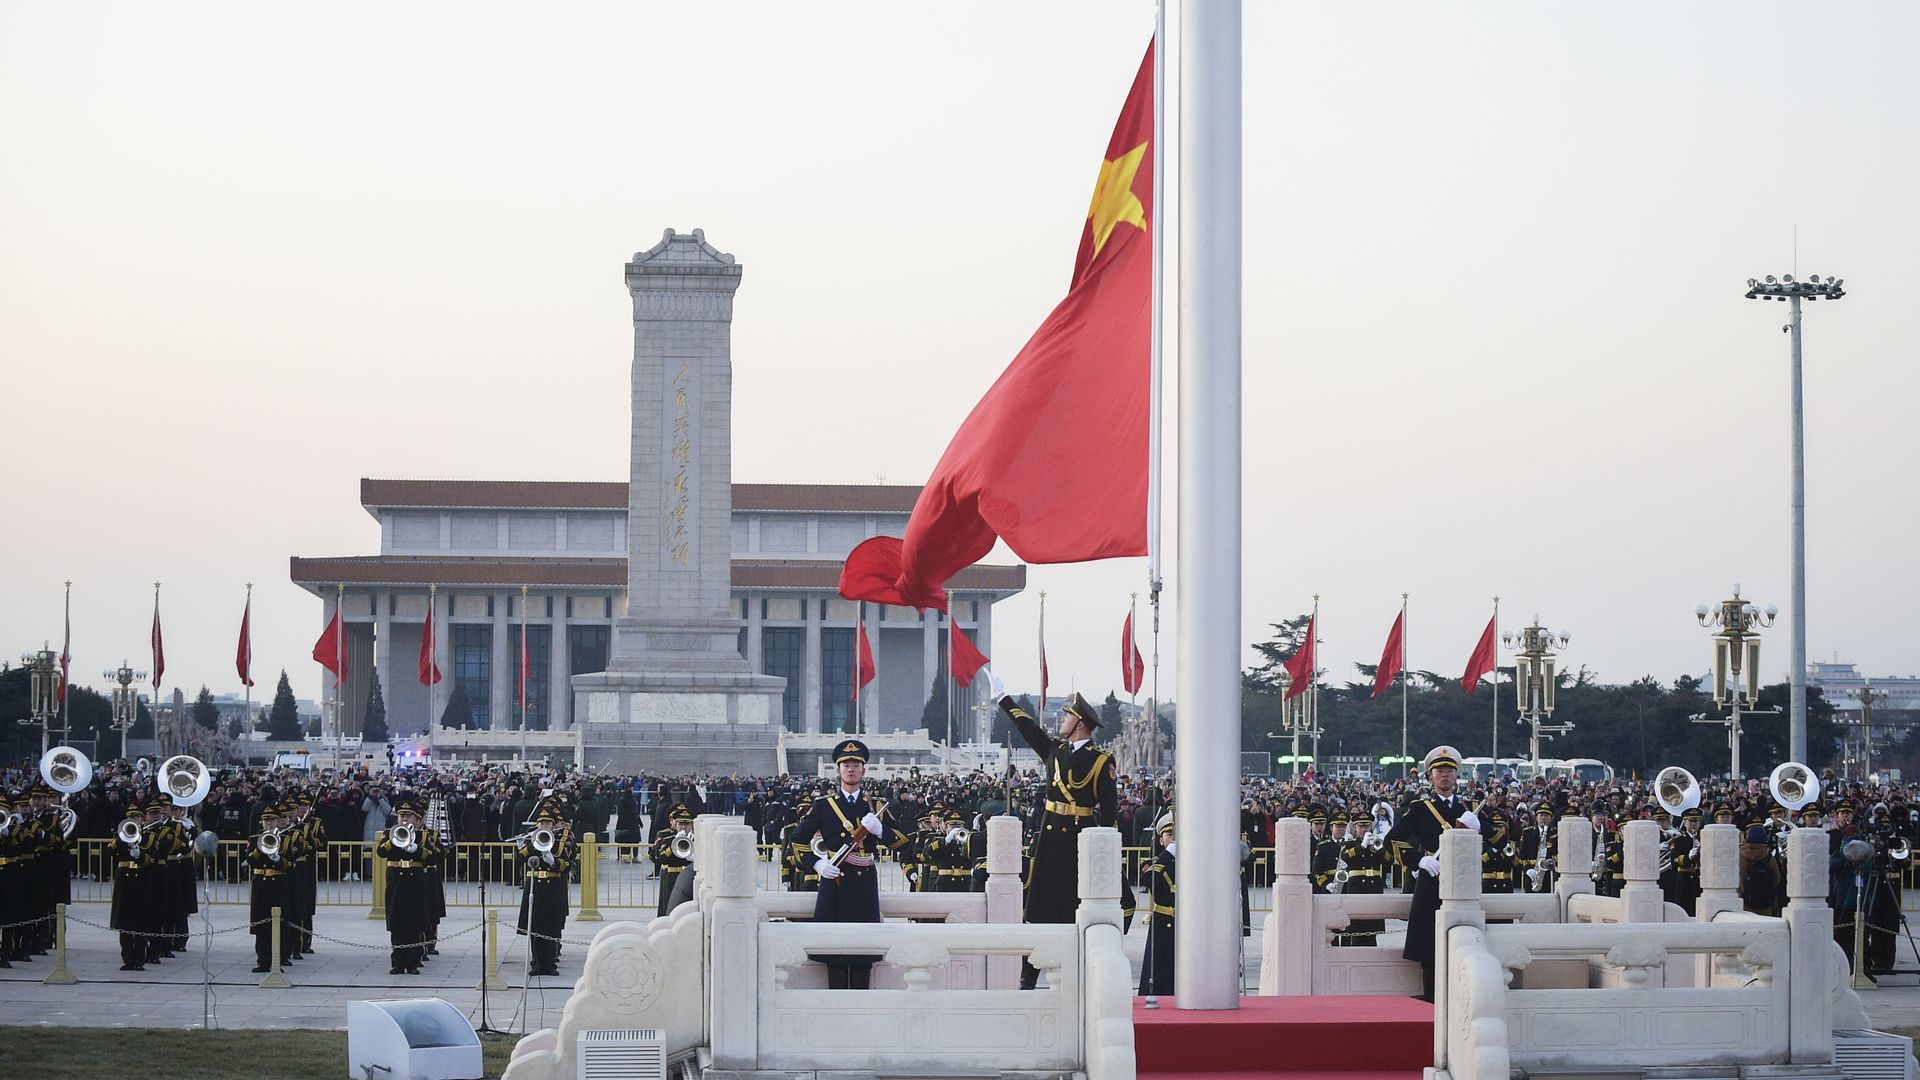 A flag is raised at Tian'anmen Square in Beijing